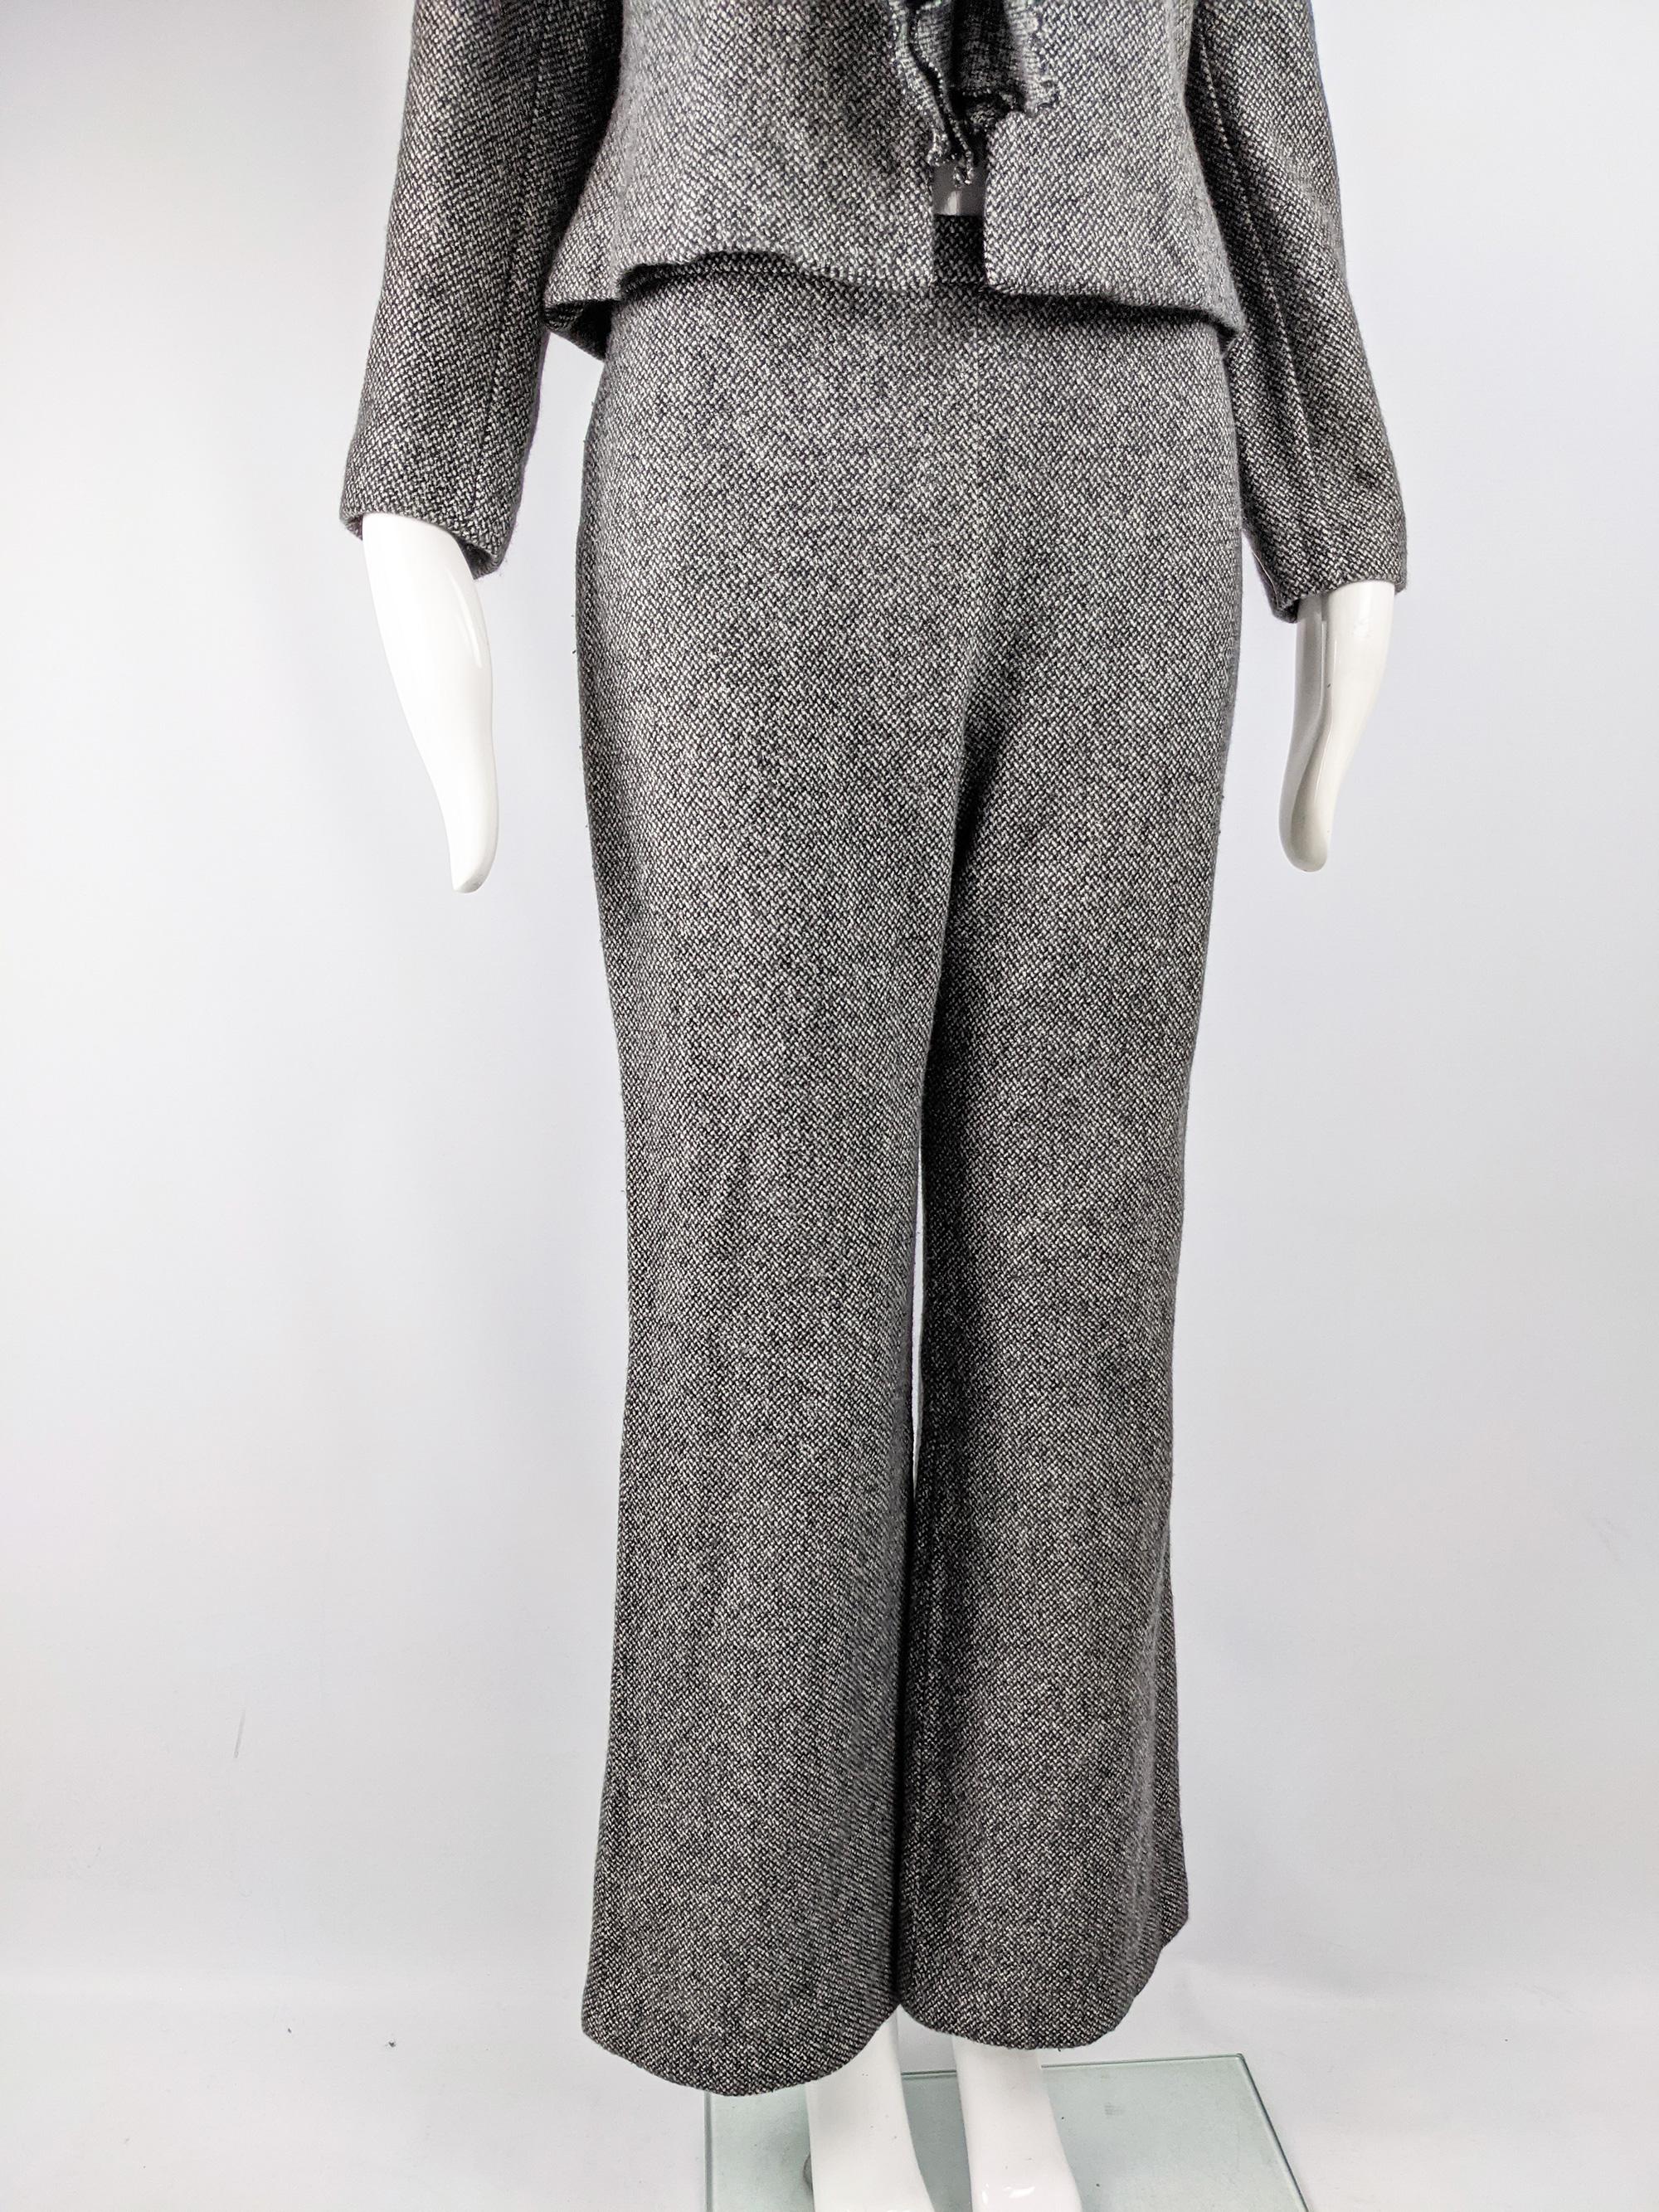 Georges Rech Womens Vintage Ruffled Wool Flared Pant Suit In Excellent Condition For Sale In Doncaster, South Yorkshire